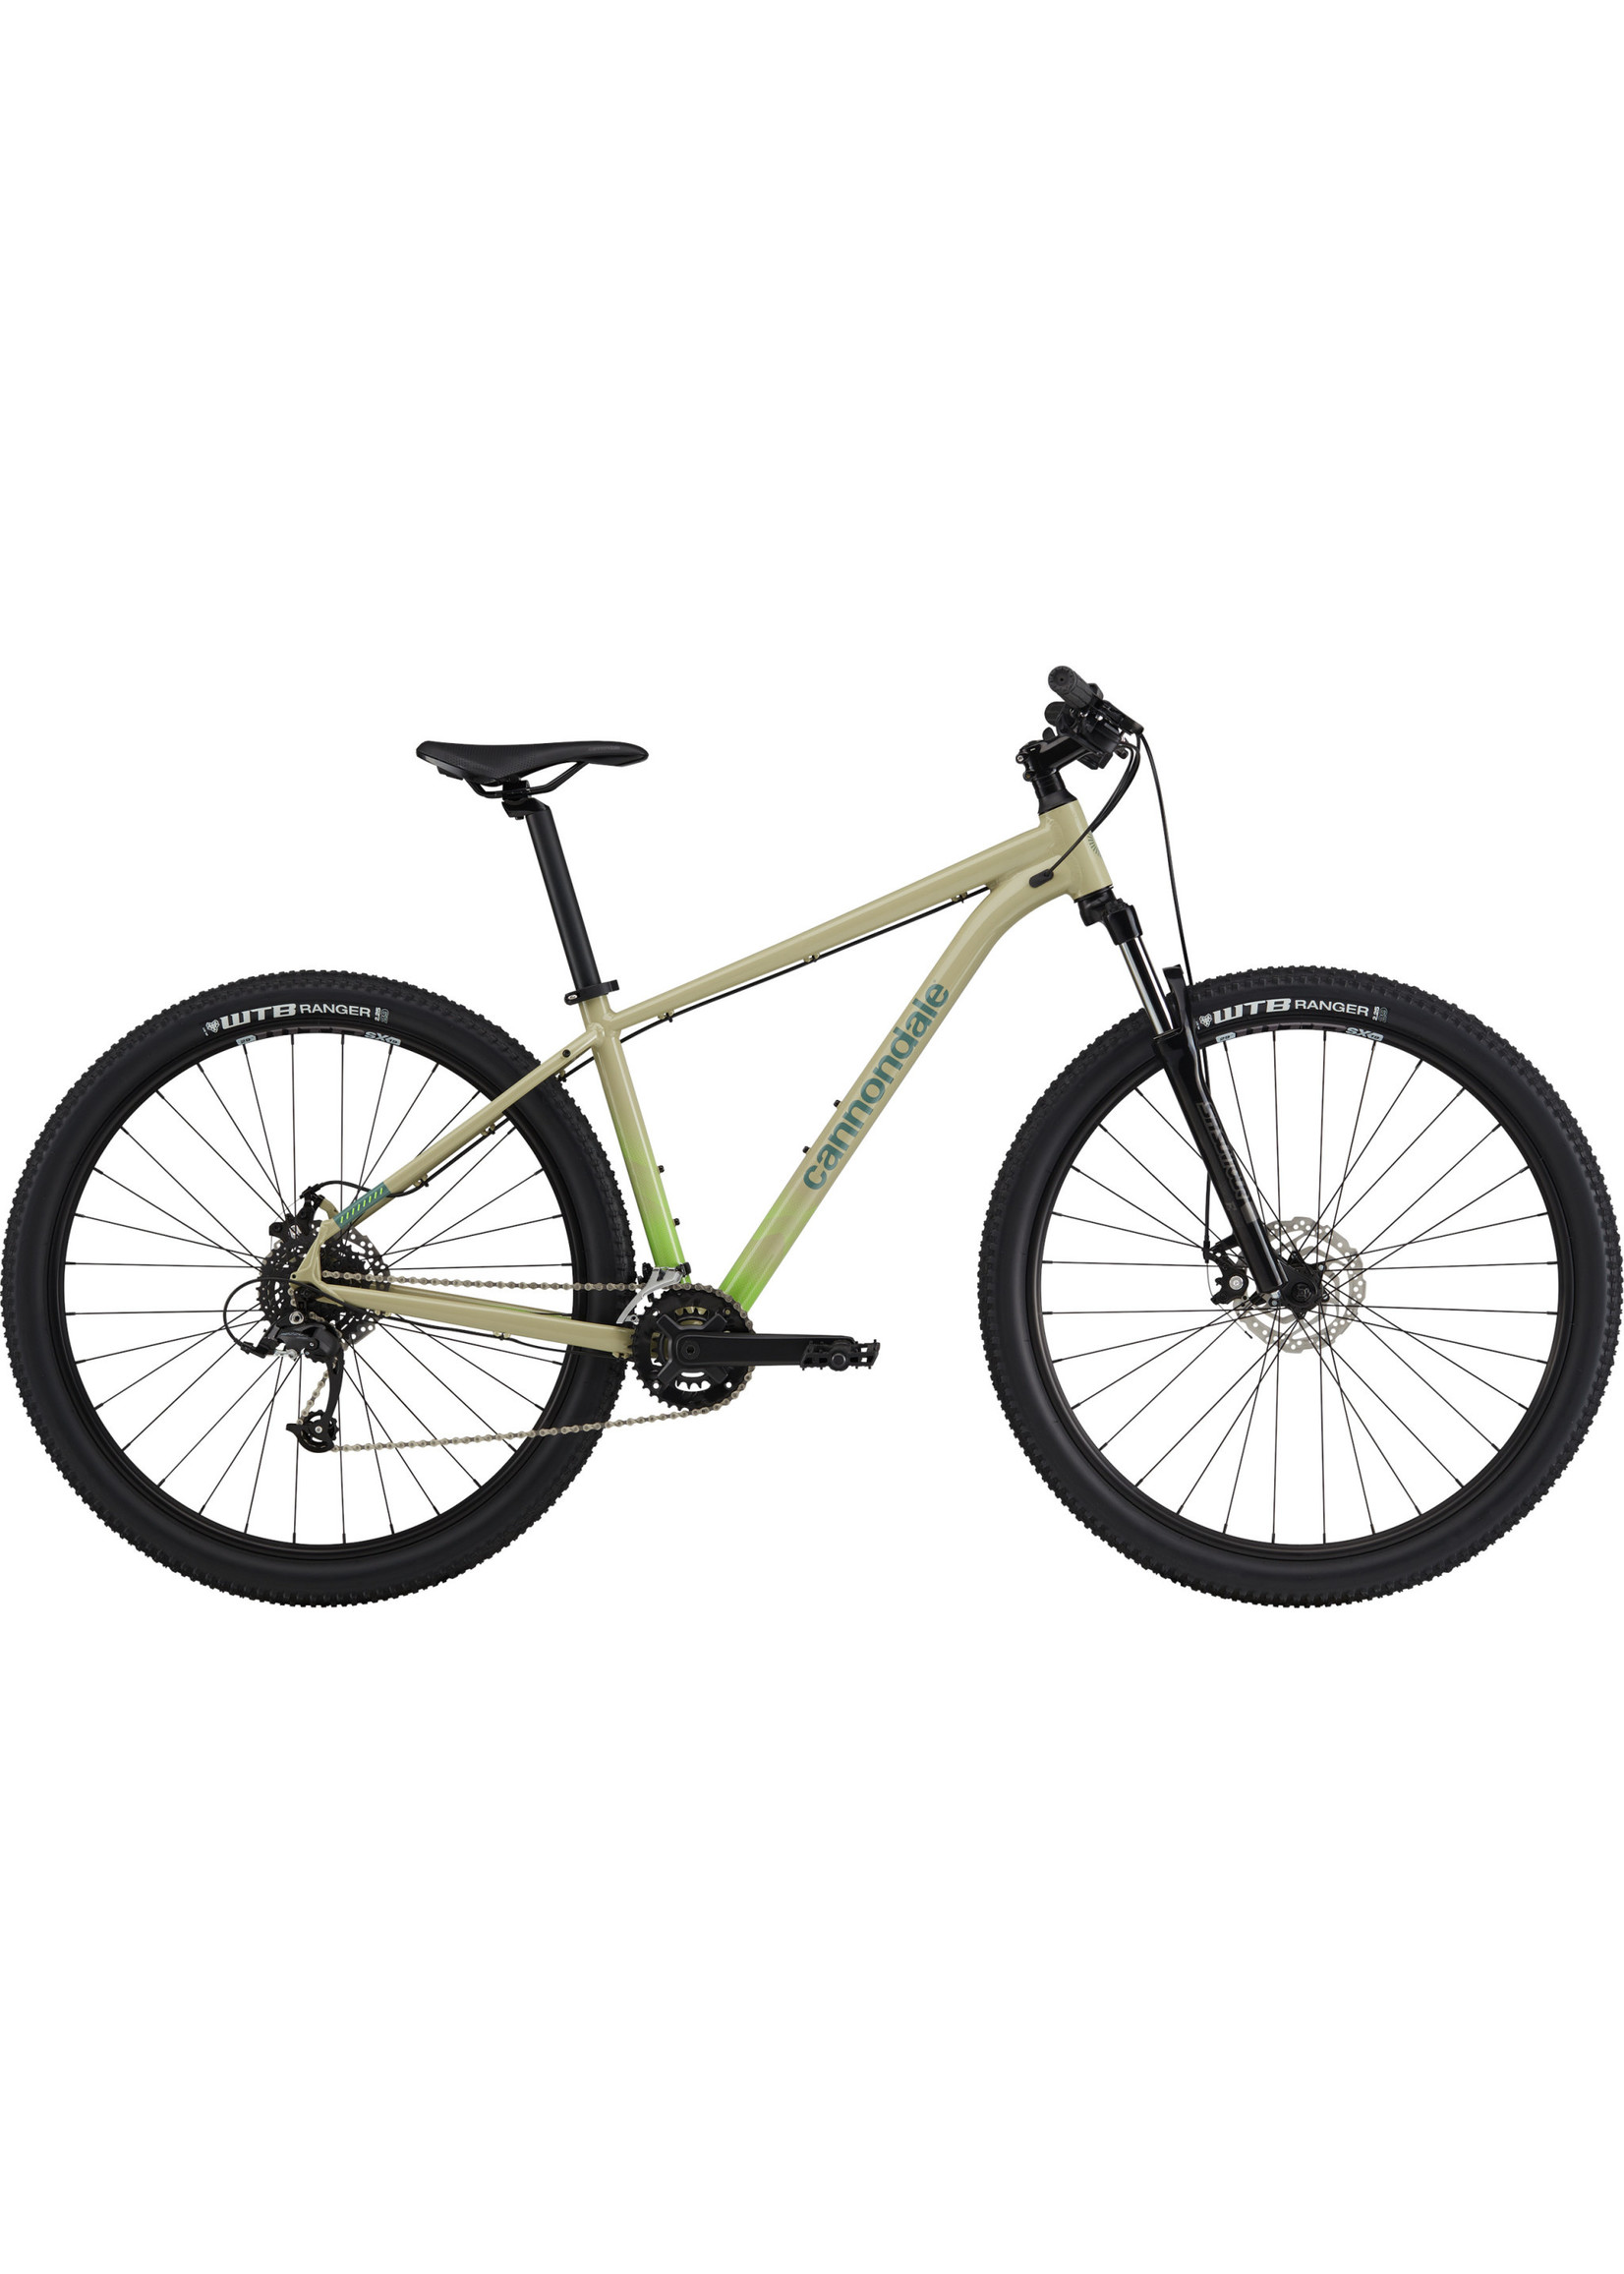 Cannondale Cannondale Trail 8 Quicksand - QSD, MD 29 M